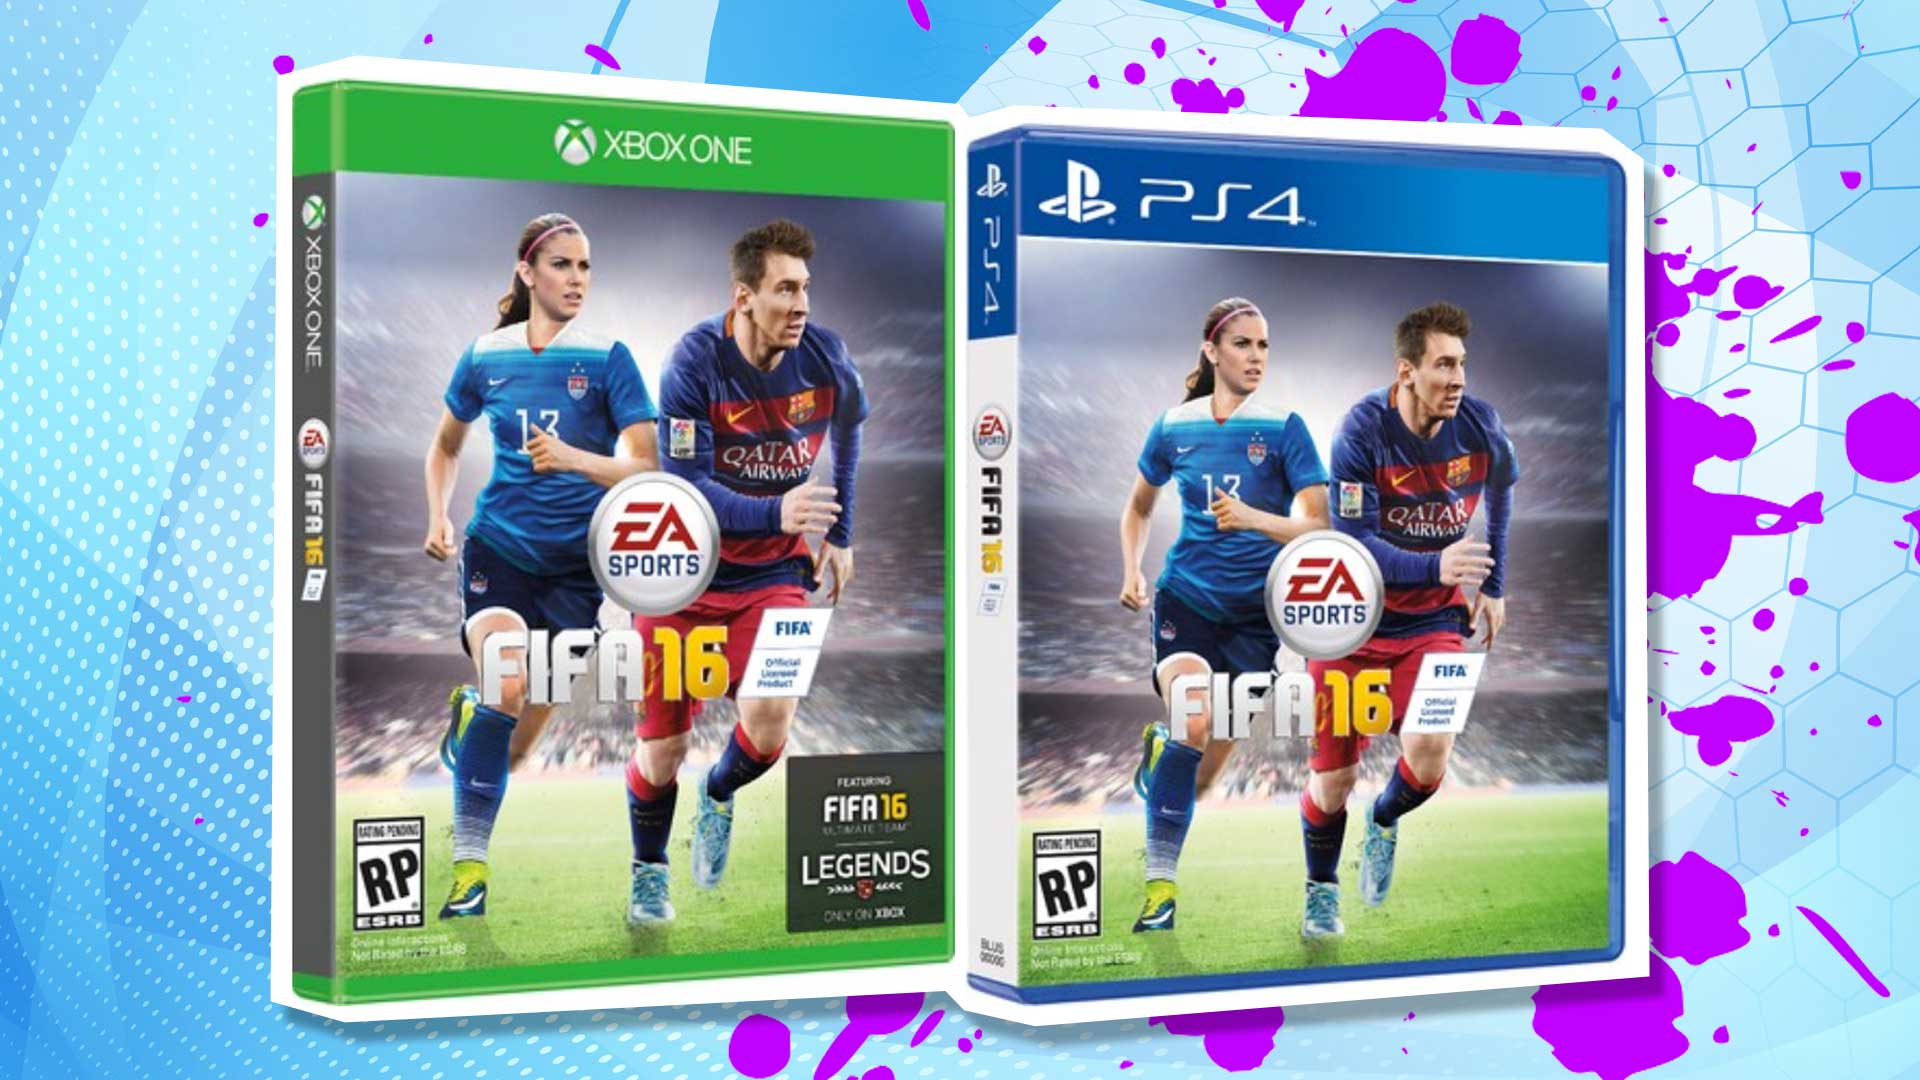 FIFA 16 for Xbox and PS4